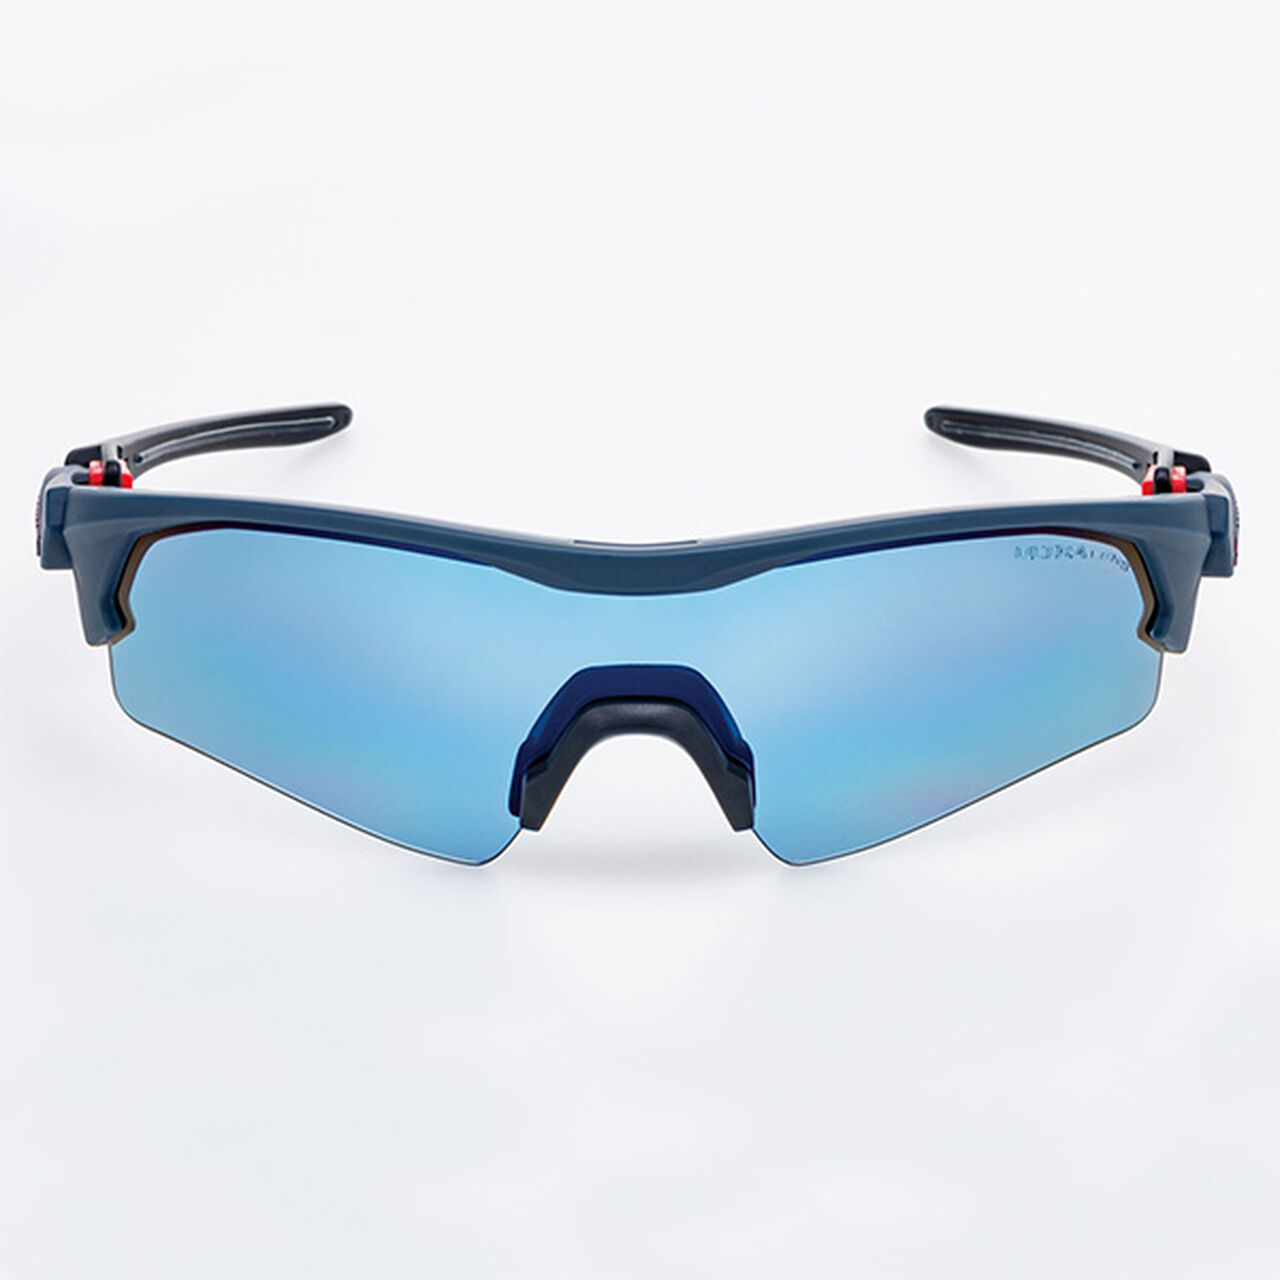 FACEONE 0167 DNAV Polarized ULTRA Ice blue,Opt10, large image number 1